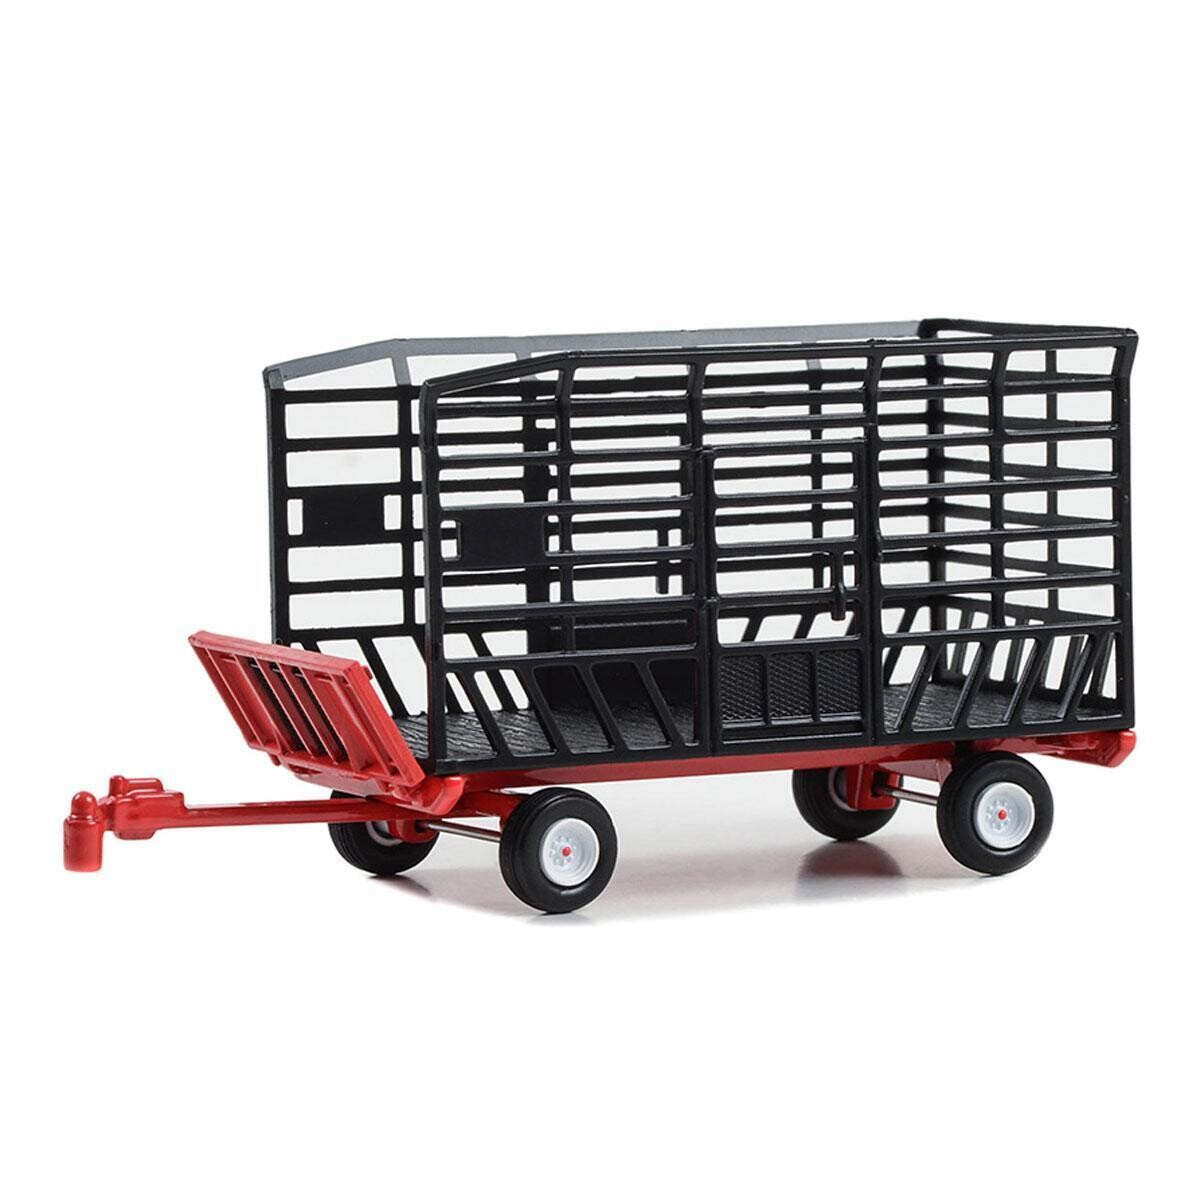 Greenlight 1/64 Down on the Farm Series 8 - Bale Throw Wagon - Black and Red 48080-F - Thumbnail